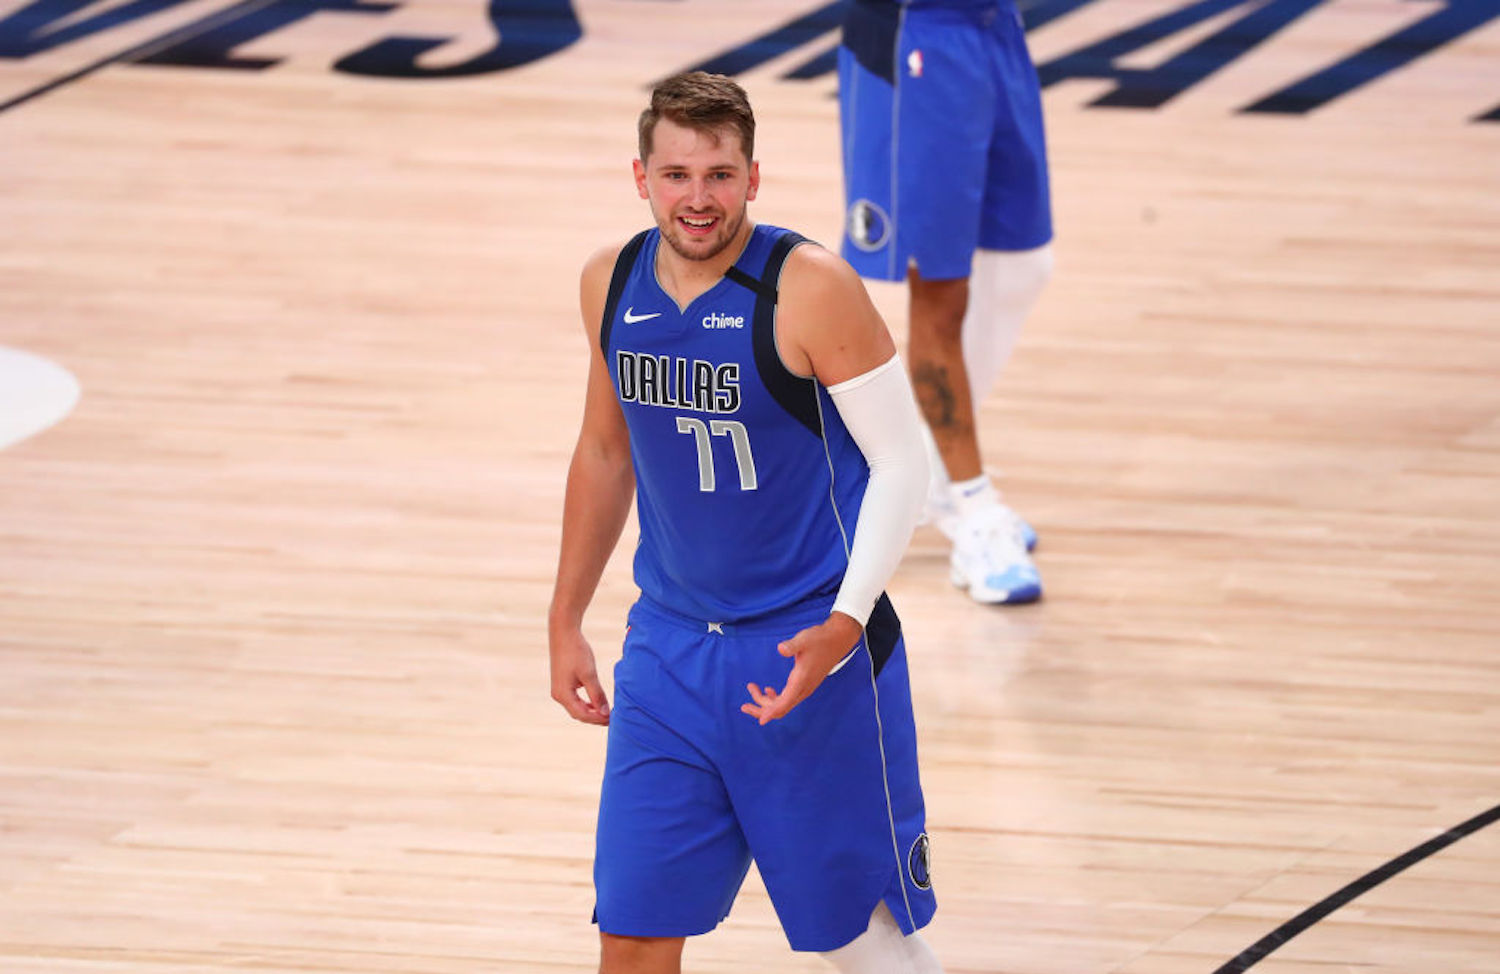 Luka Doncic was just named to the All-NBA First Team for the 2019-20 season, and he passed LeBron James in the process.